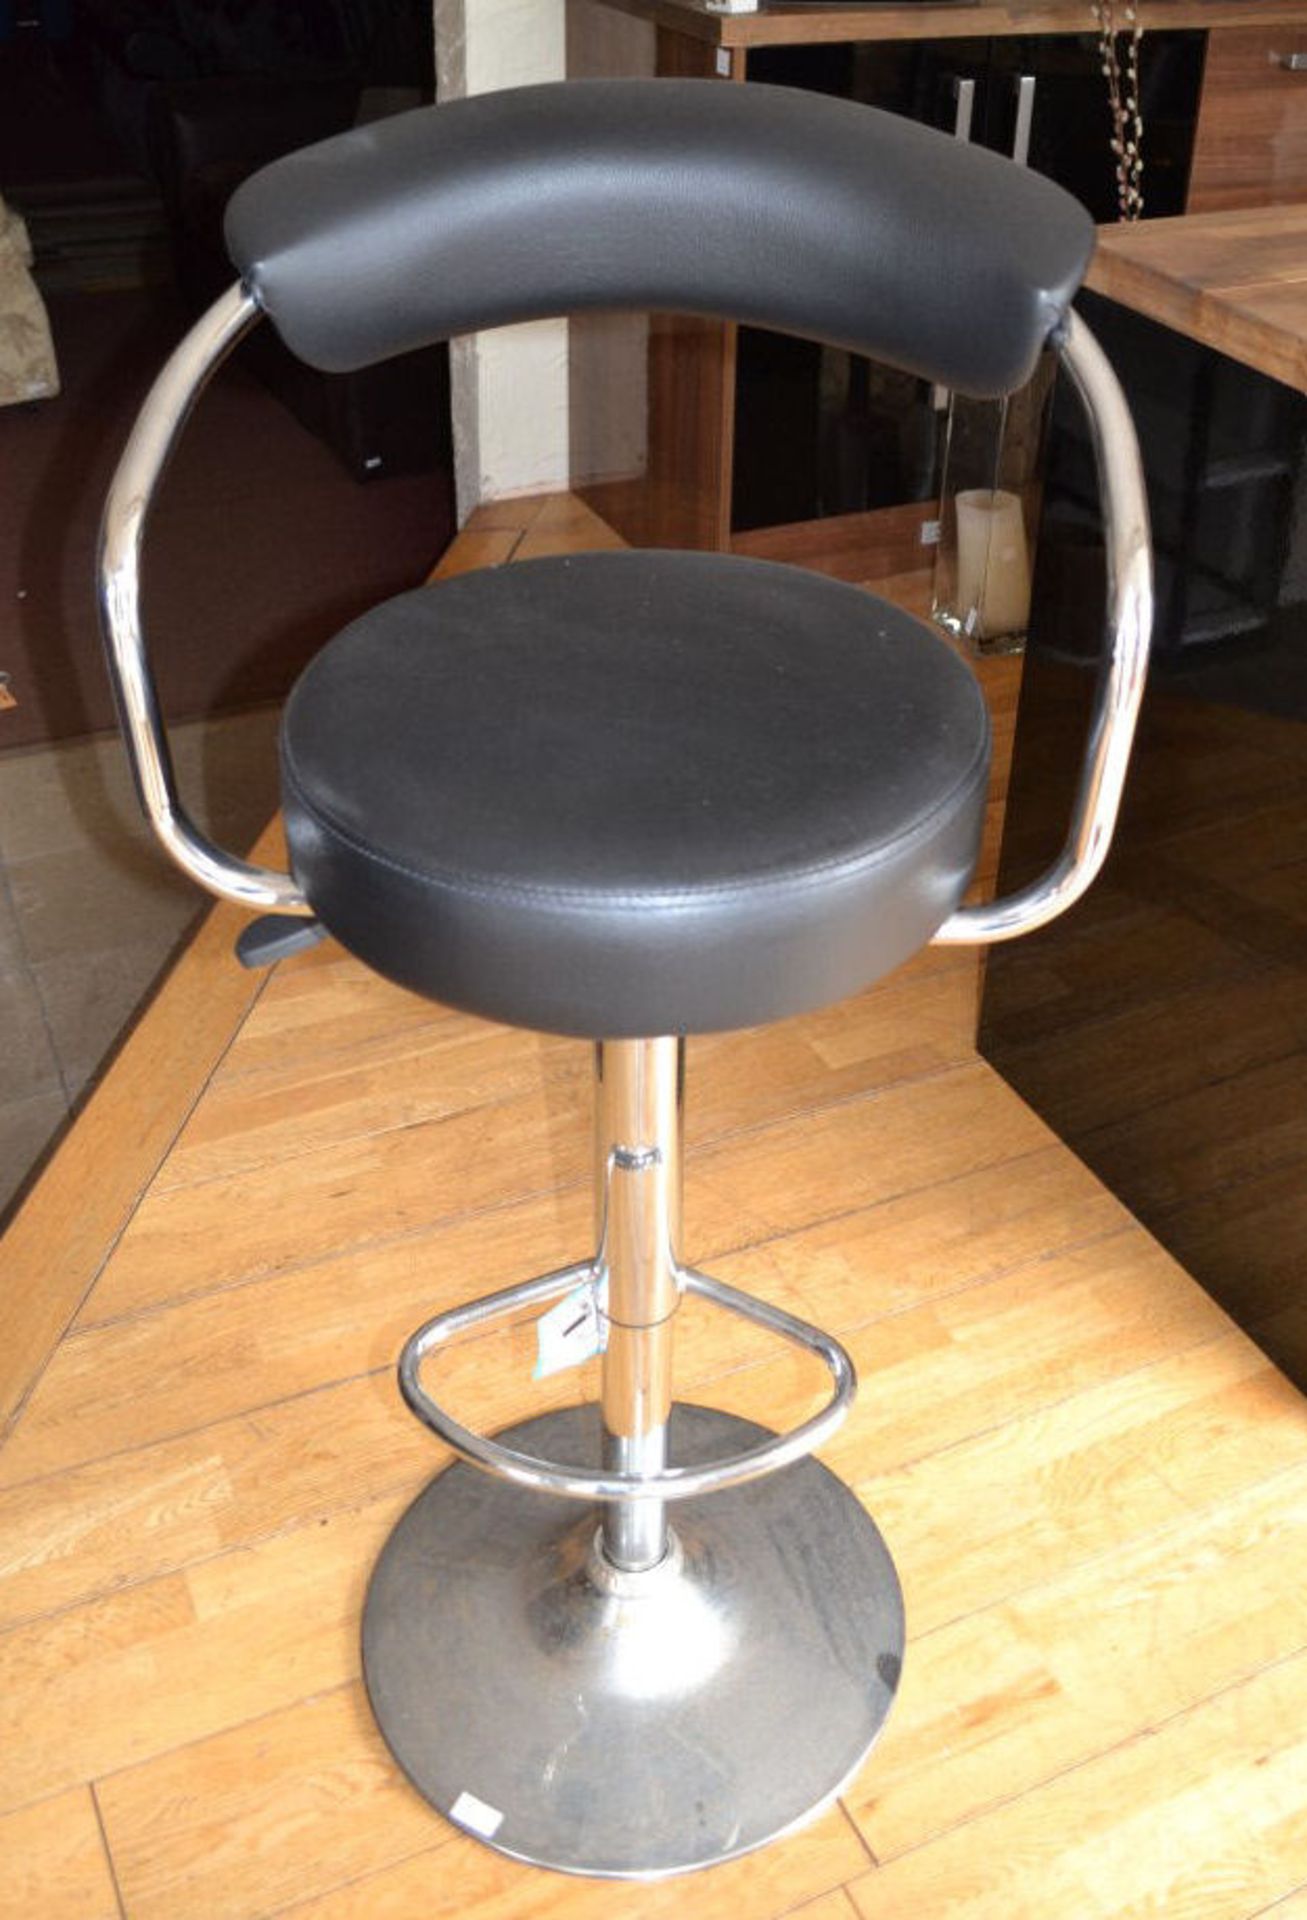 1 x Height Adjustable Swivel Chair In Black And Silver - Image 2 of 2